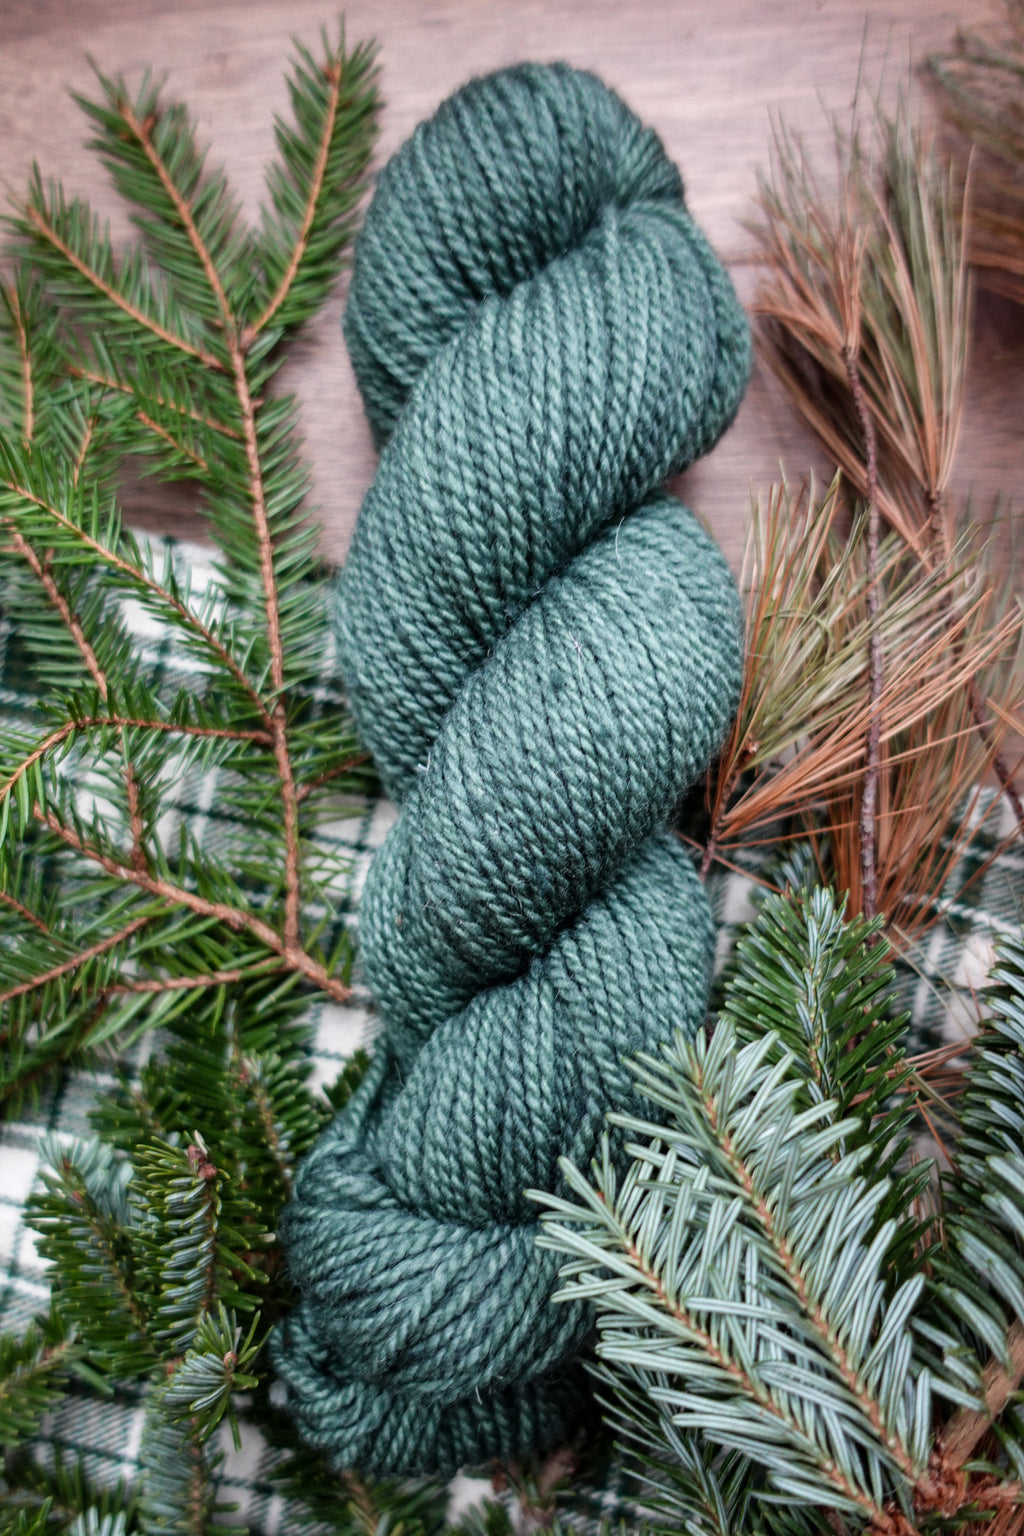 A DK weight skein of yarn has been naturally dyed a blue green color. It lays on a tabletop next to spruce branches.